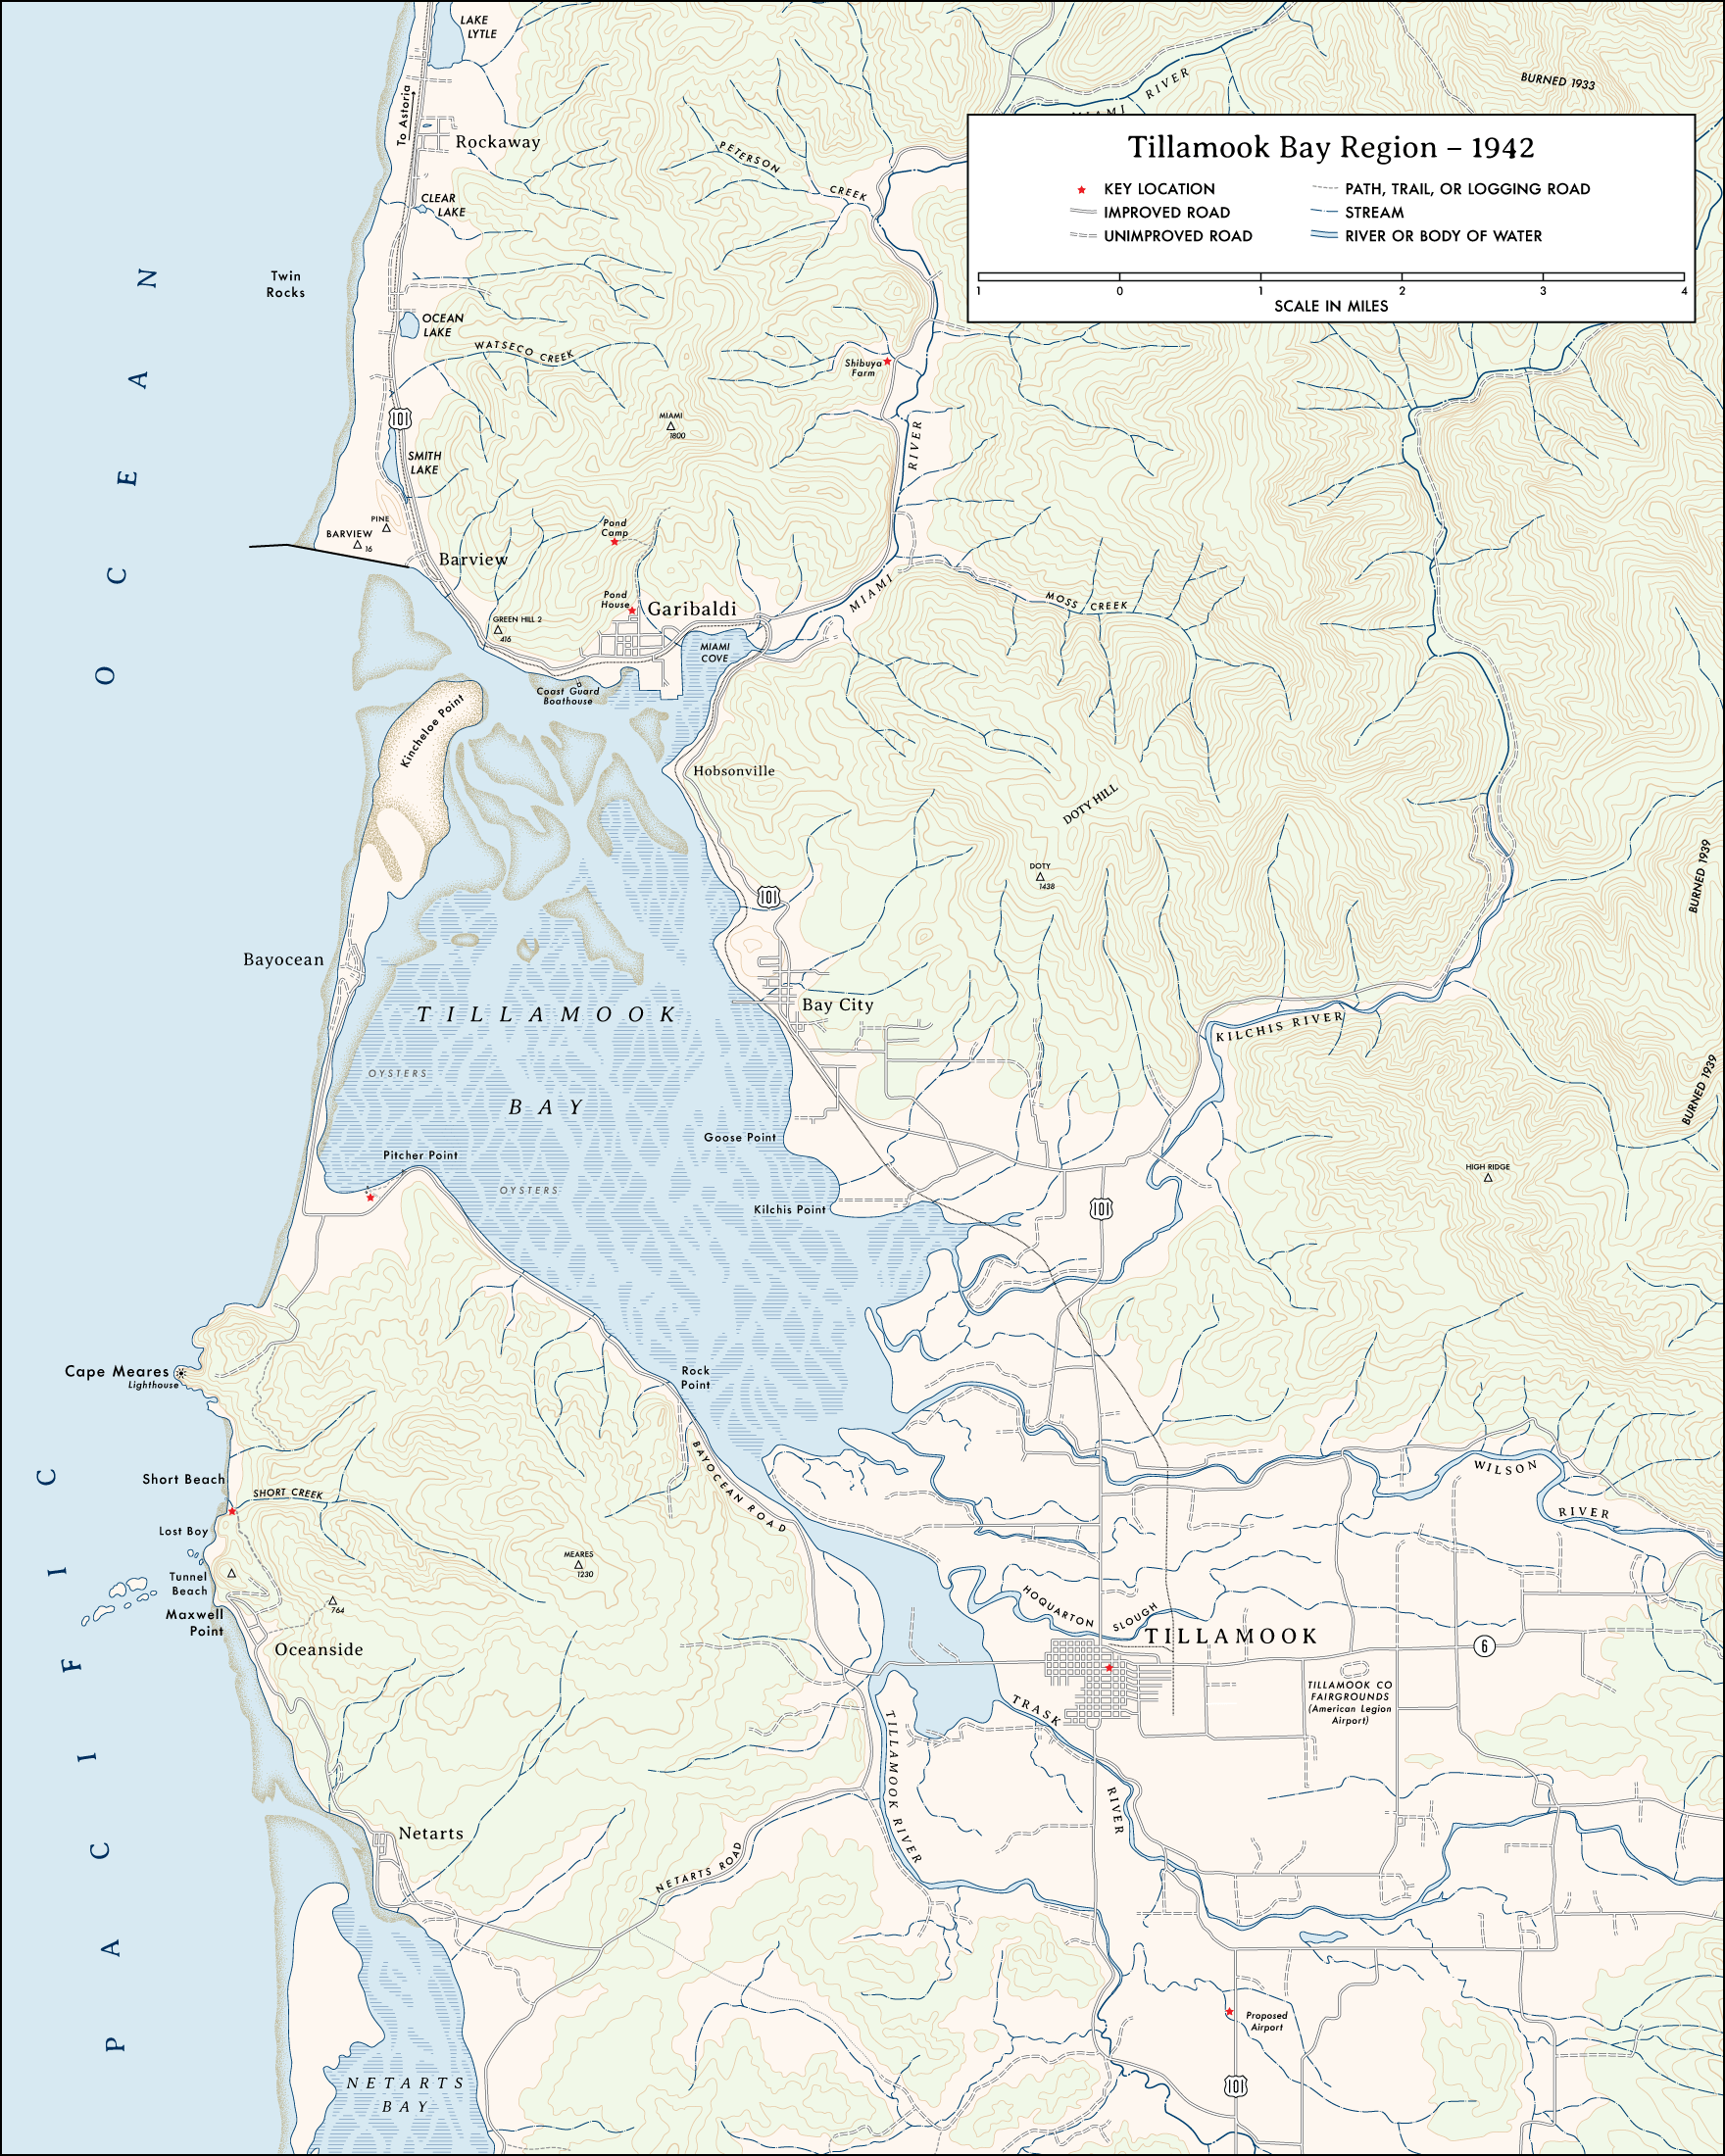 Map of Tillamook Bay and Surrounding Areas in 1942